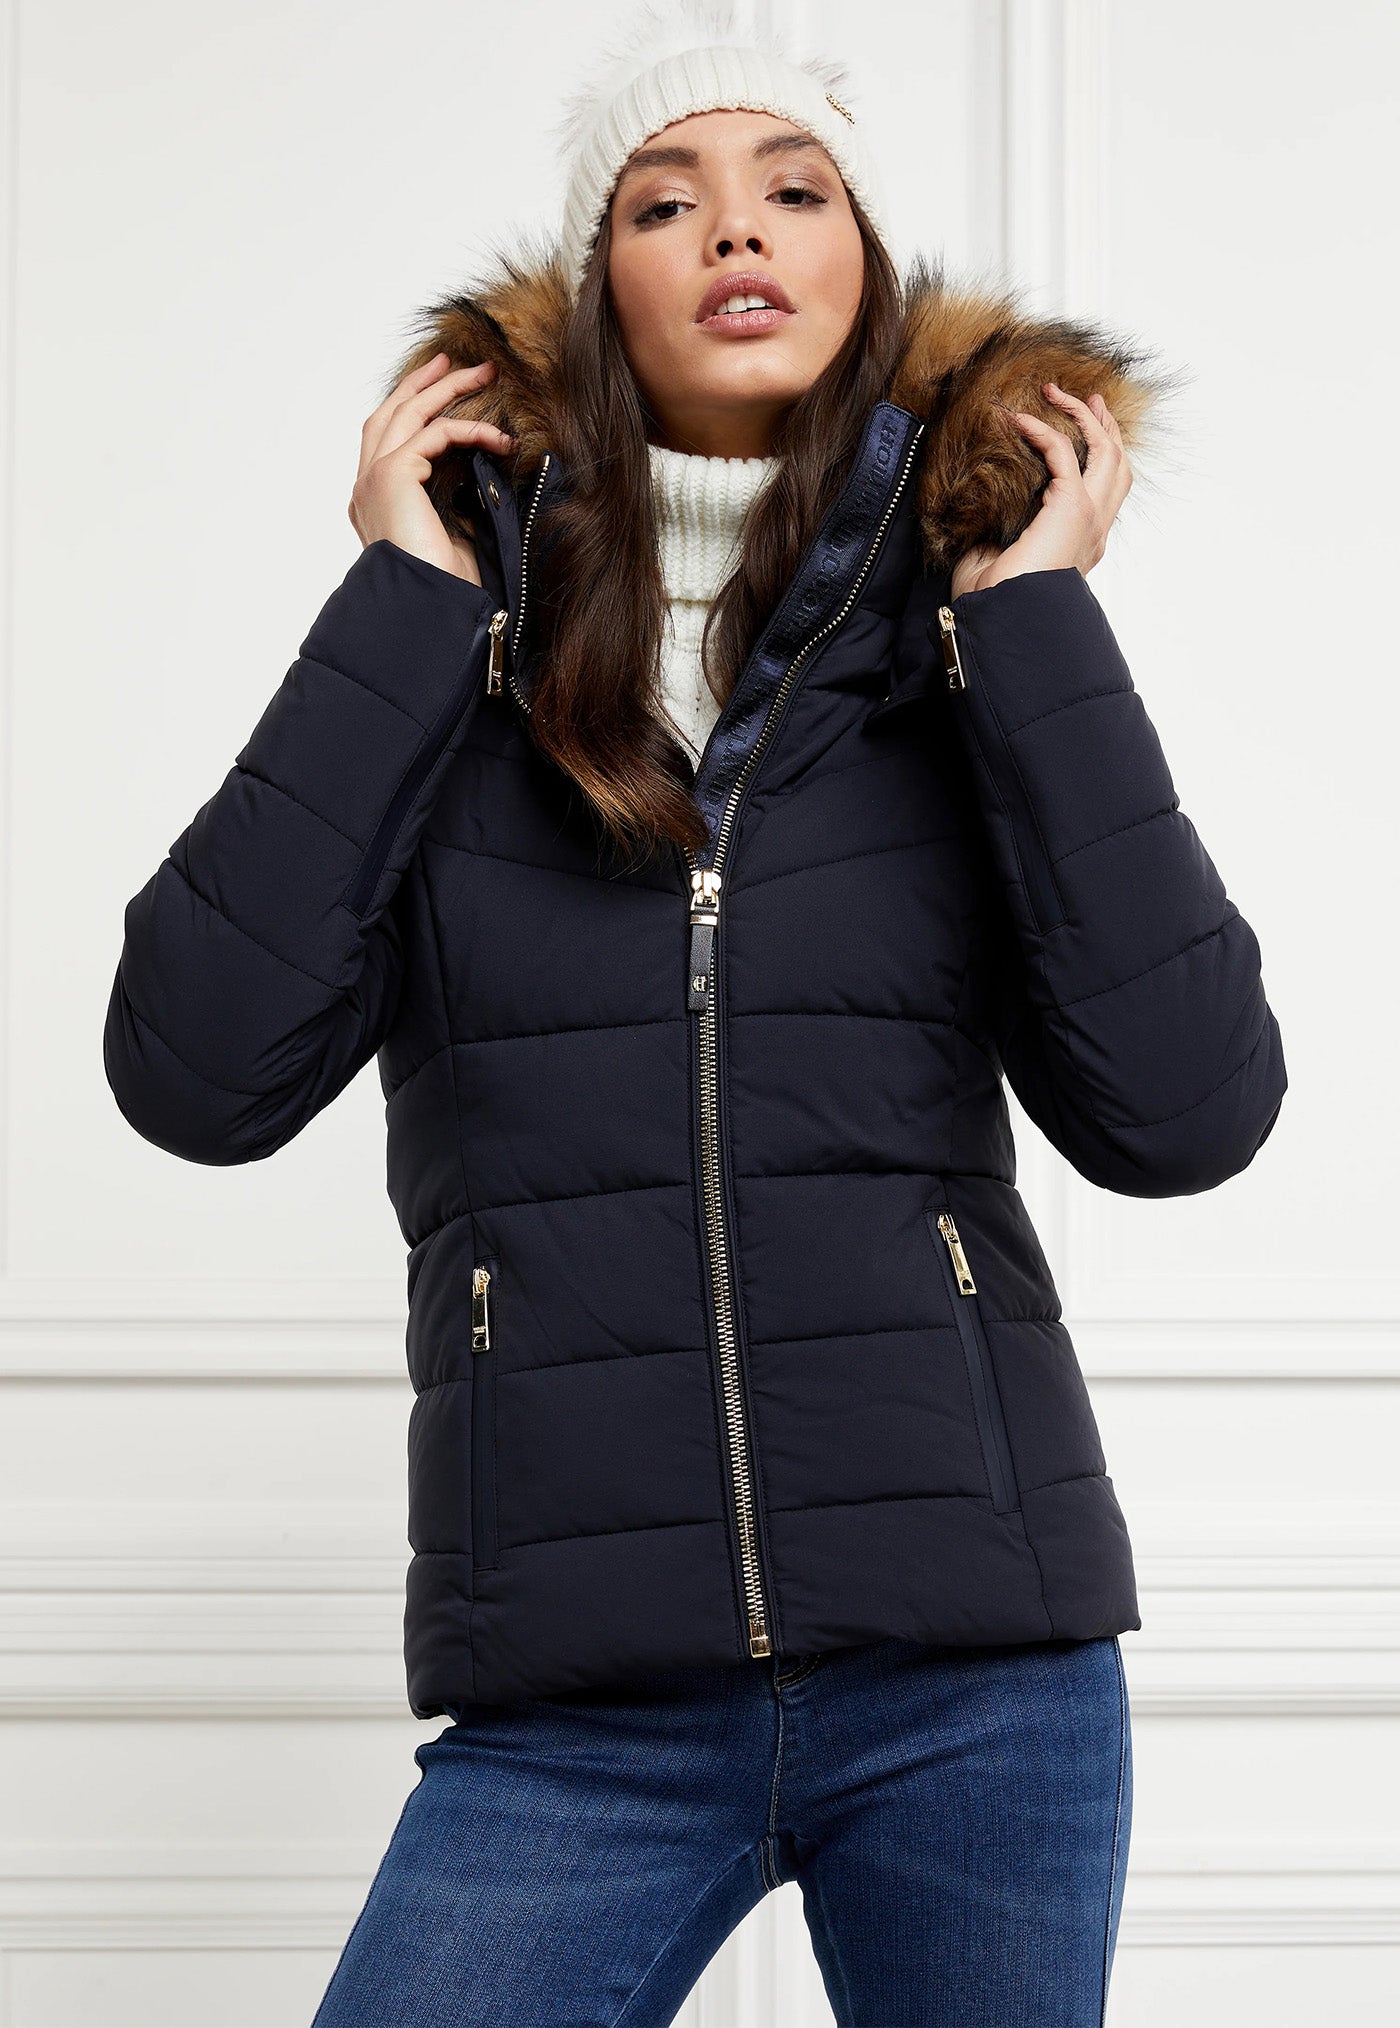 Whistler Puffer Jacket - Ink Navy sold by Angel Divine